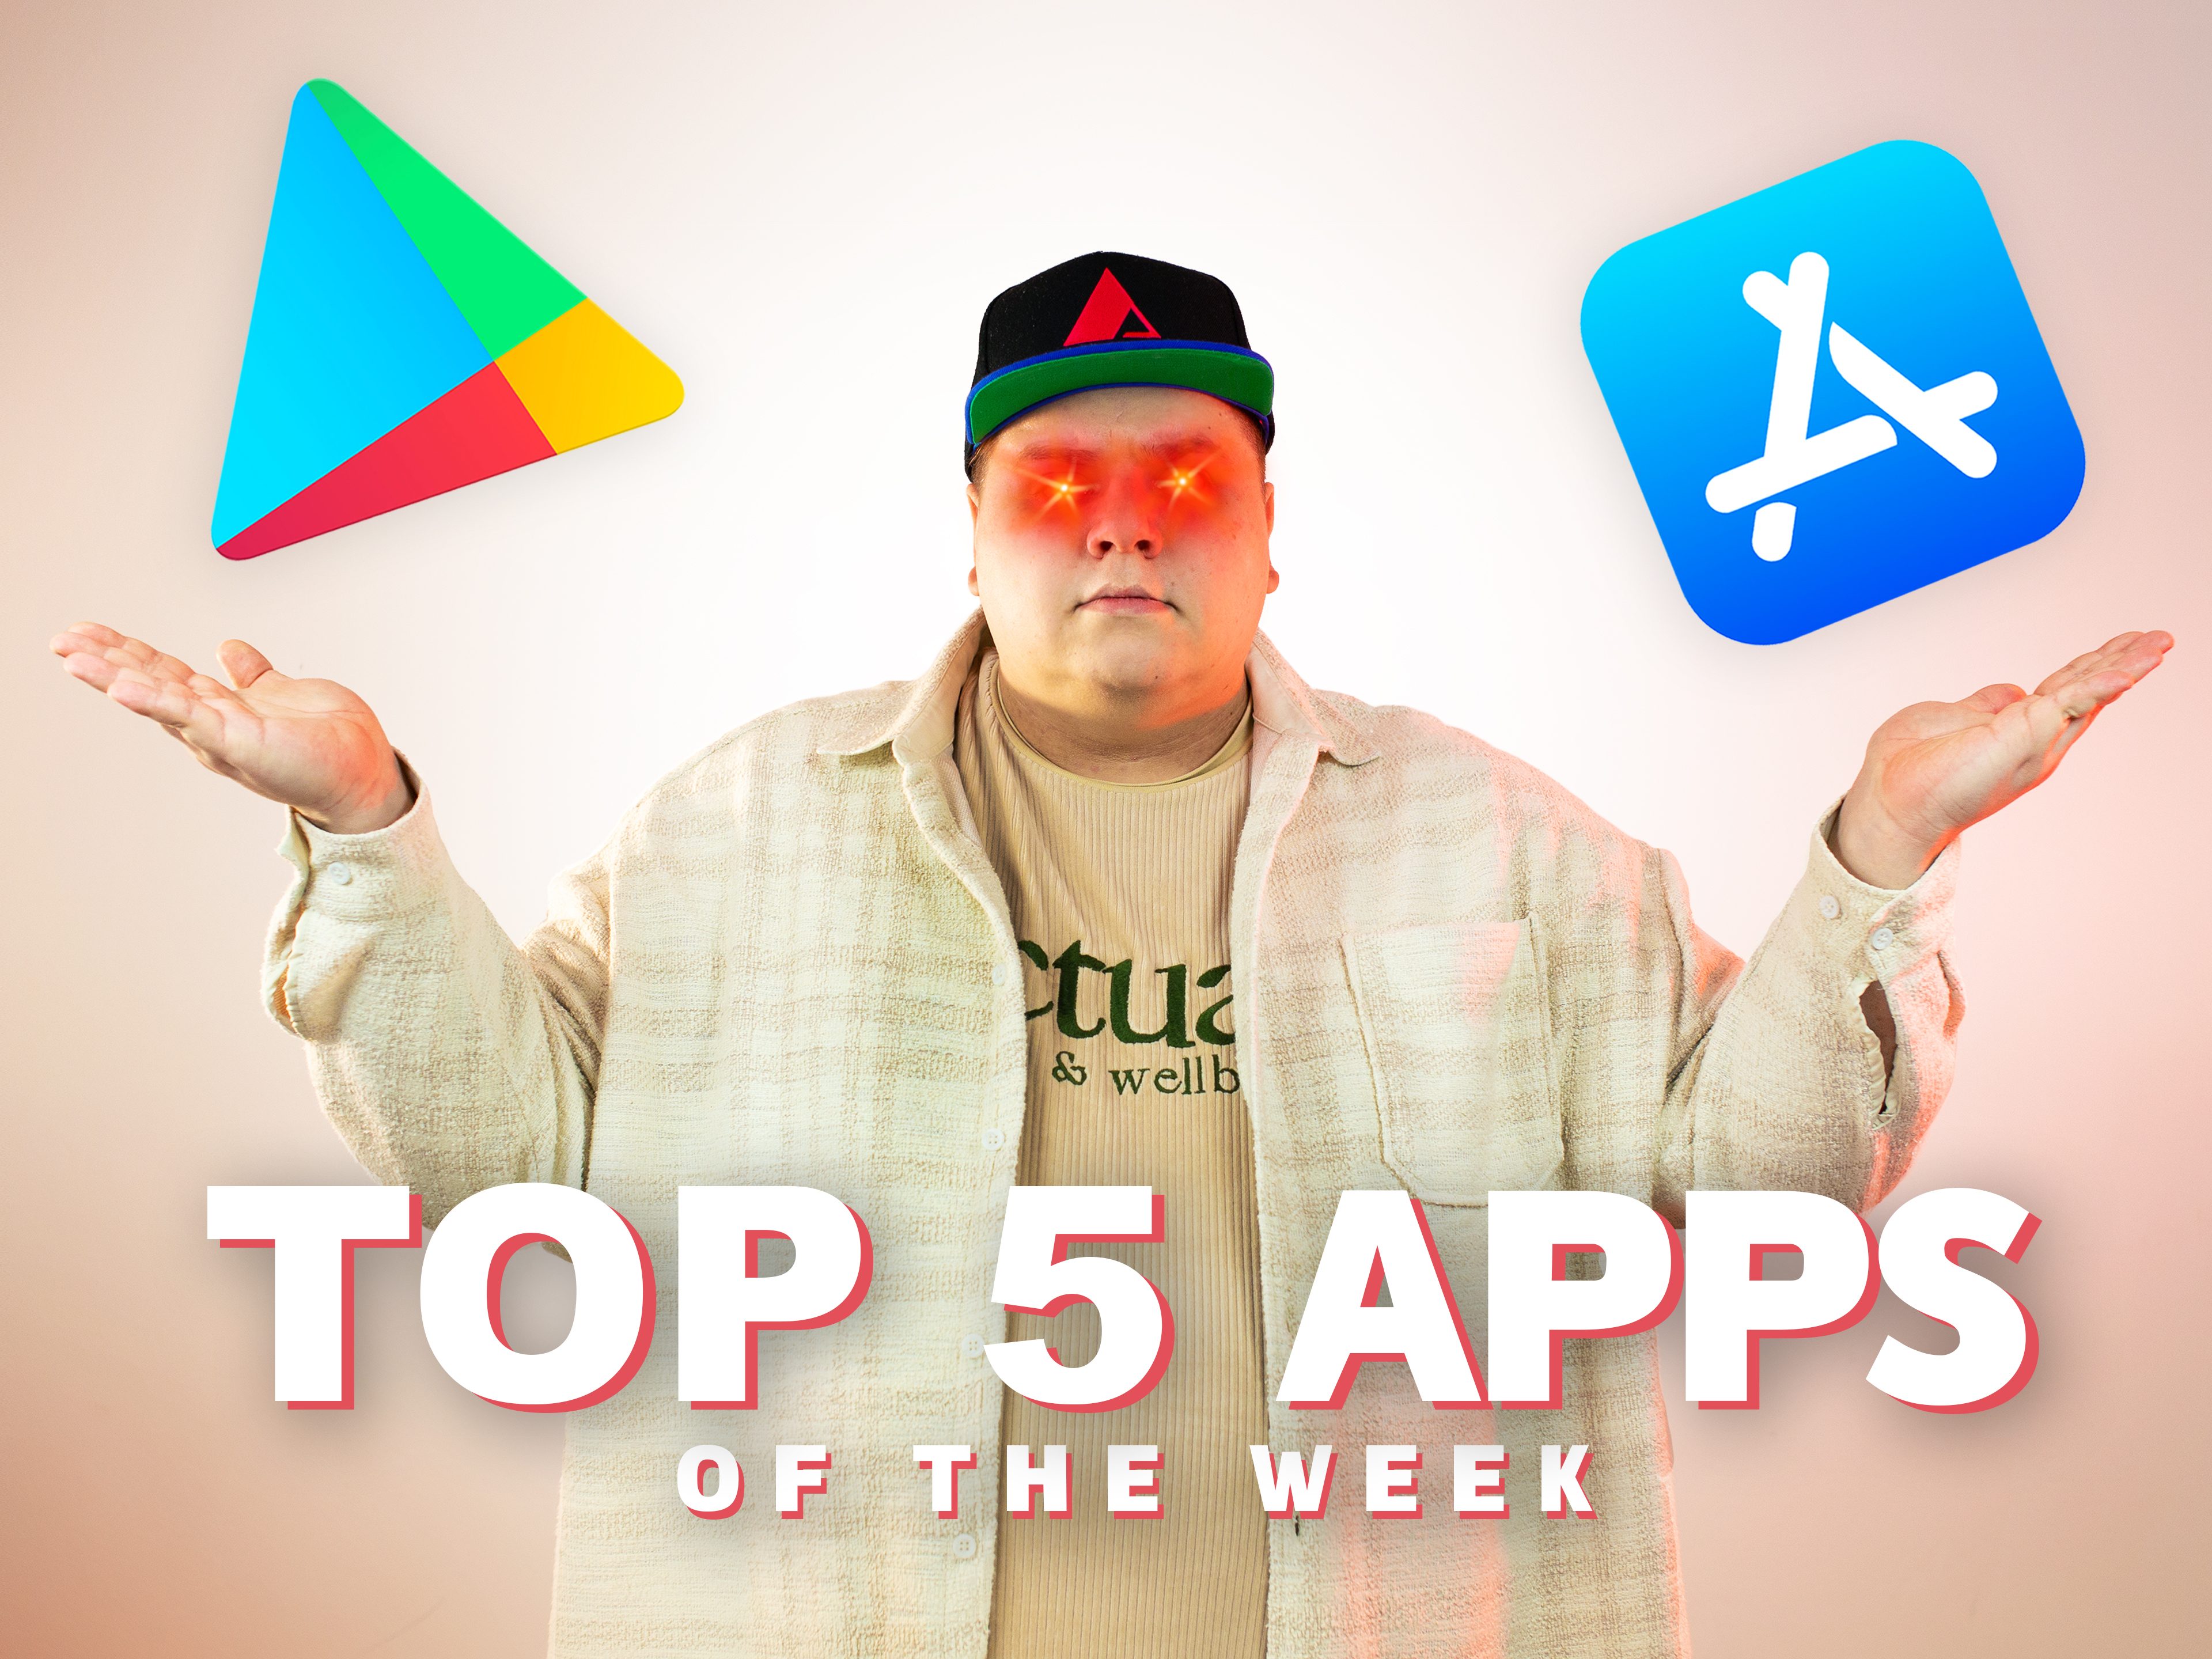 Here they are: Our top 5 Android and iOS apps of the week | NextPit